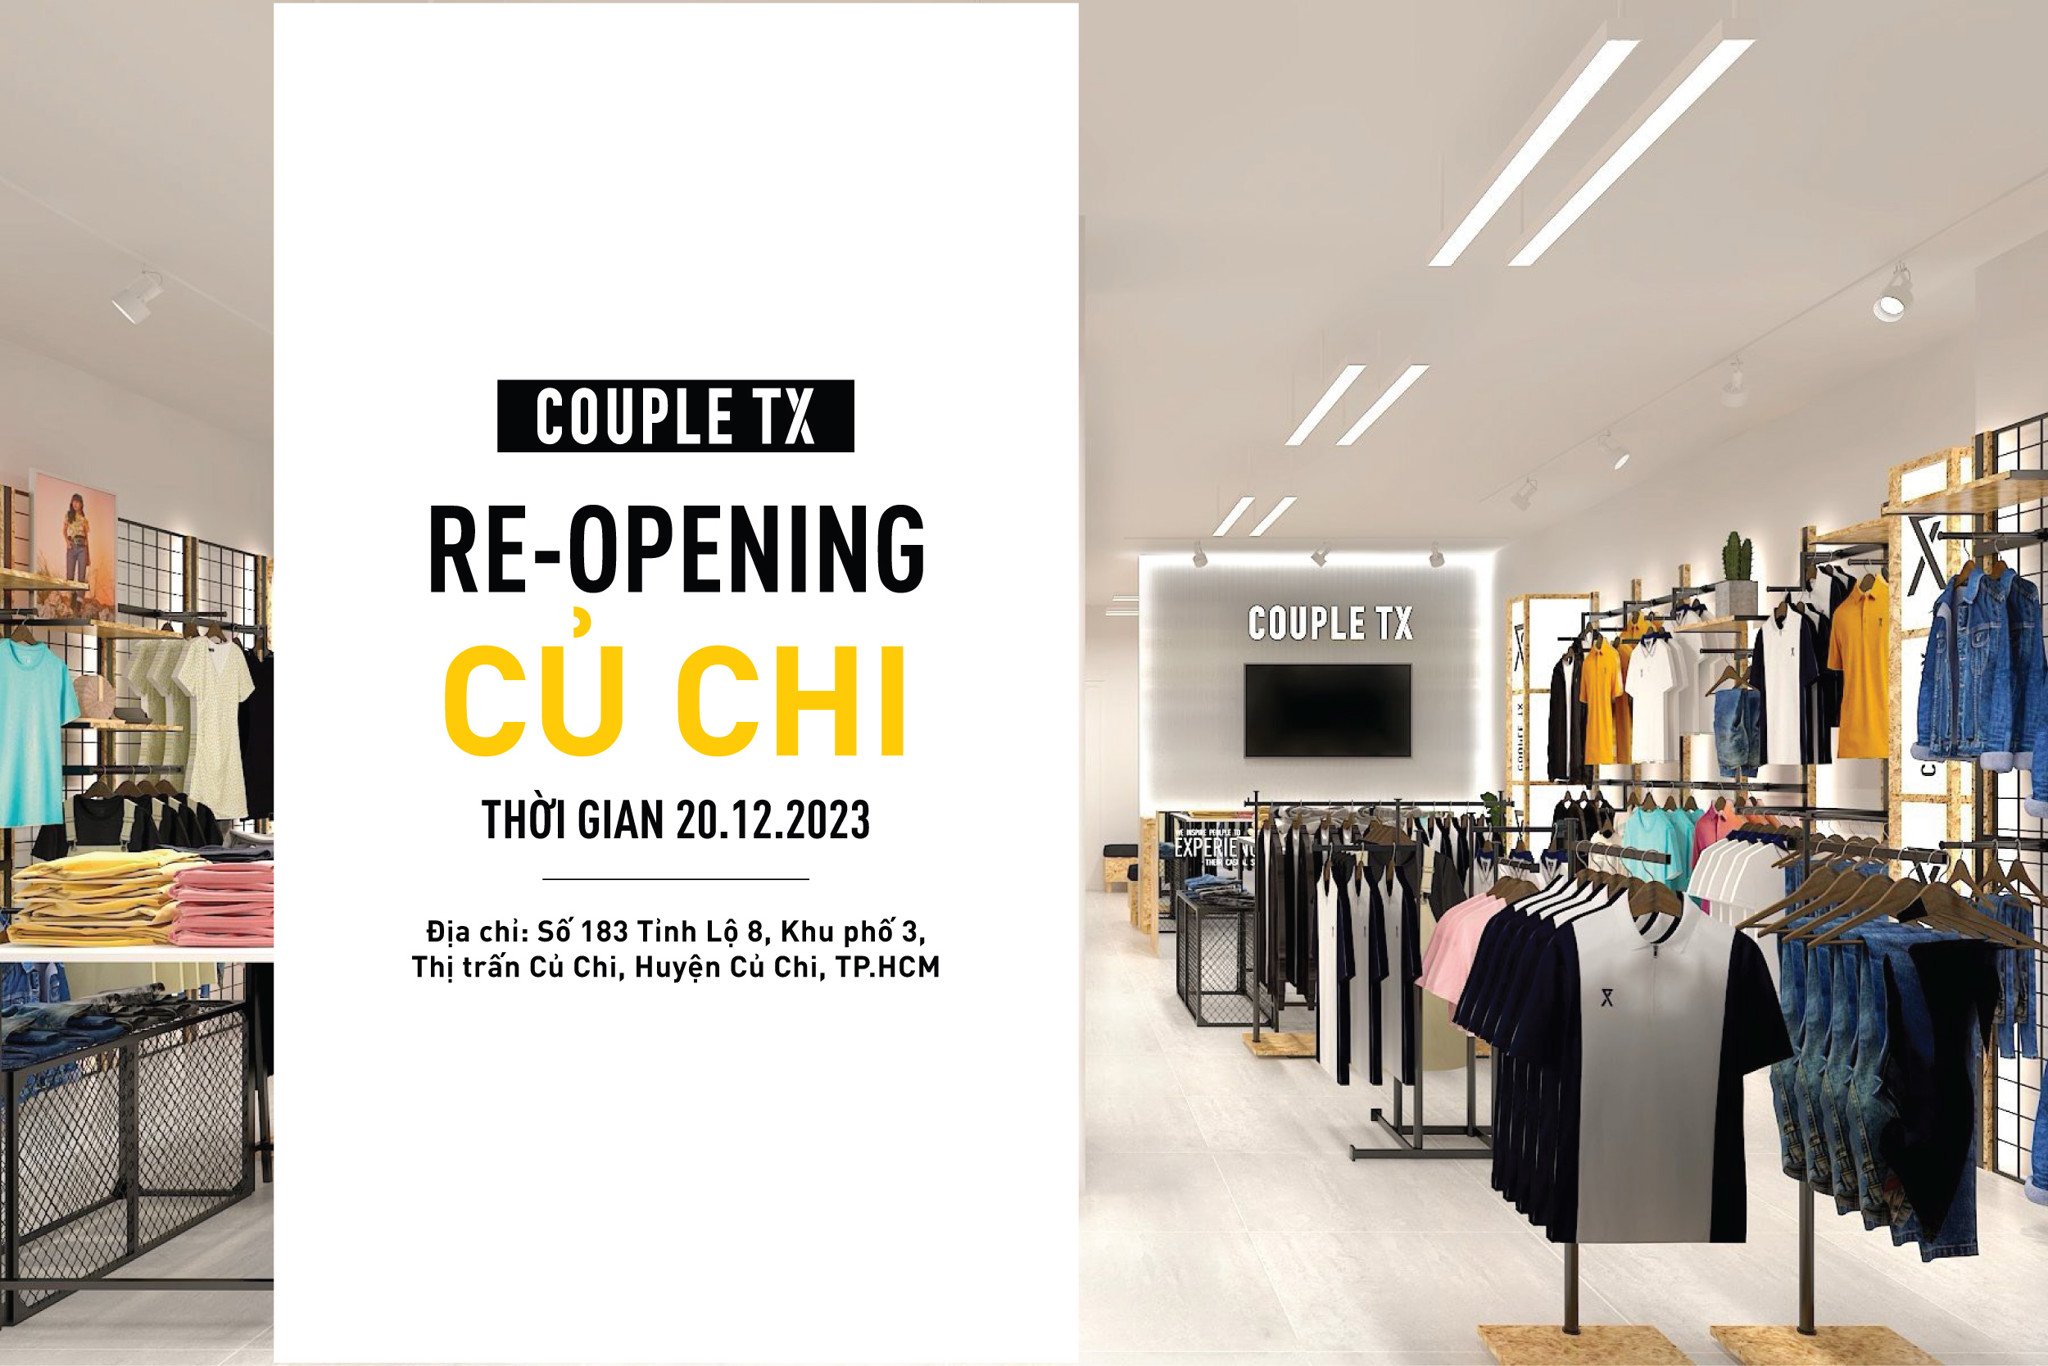 RE - OPENING COUPLE TX CỦ CHI | 20.12.2023